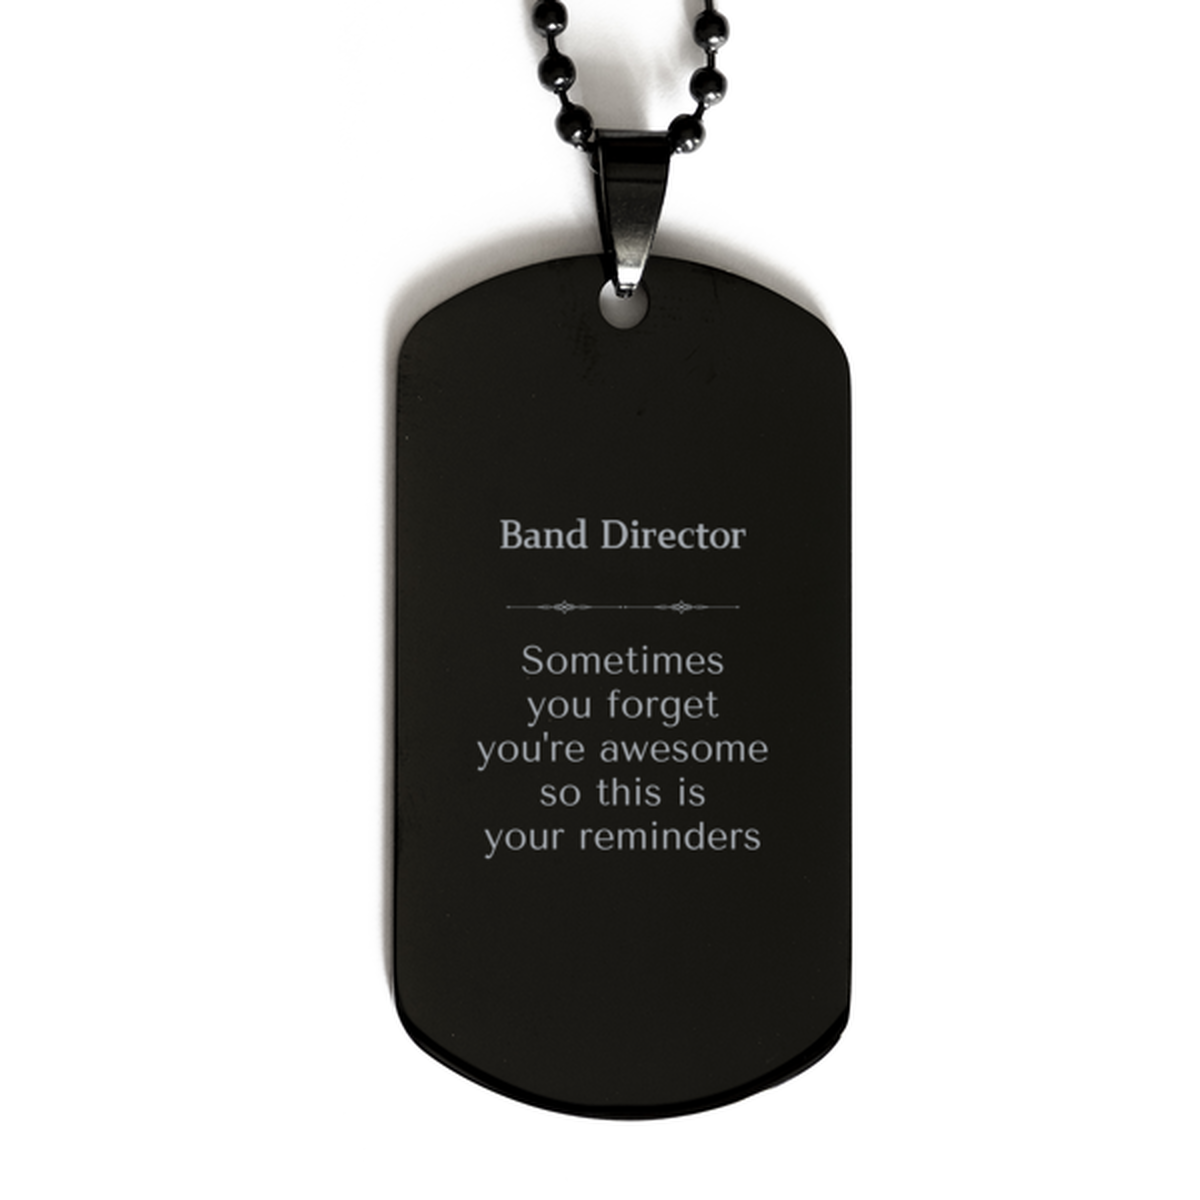 Sentimental Band Director Black Dog Tag, Band Director Sometimes you forget you're awesome so this is your reminders, Graduation Christmas Birthday Gifts for Band Director, Men, Women, Coworkers